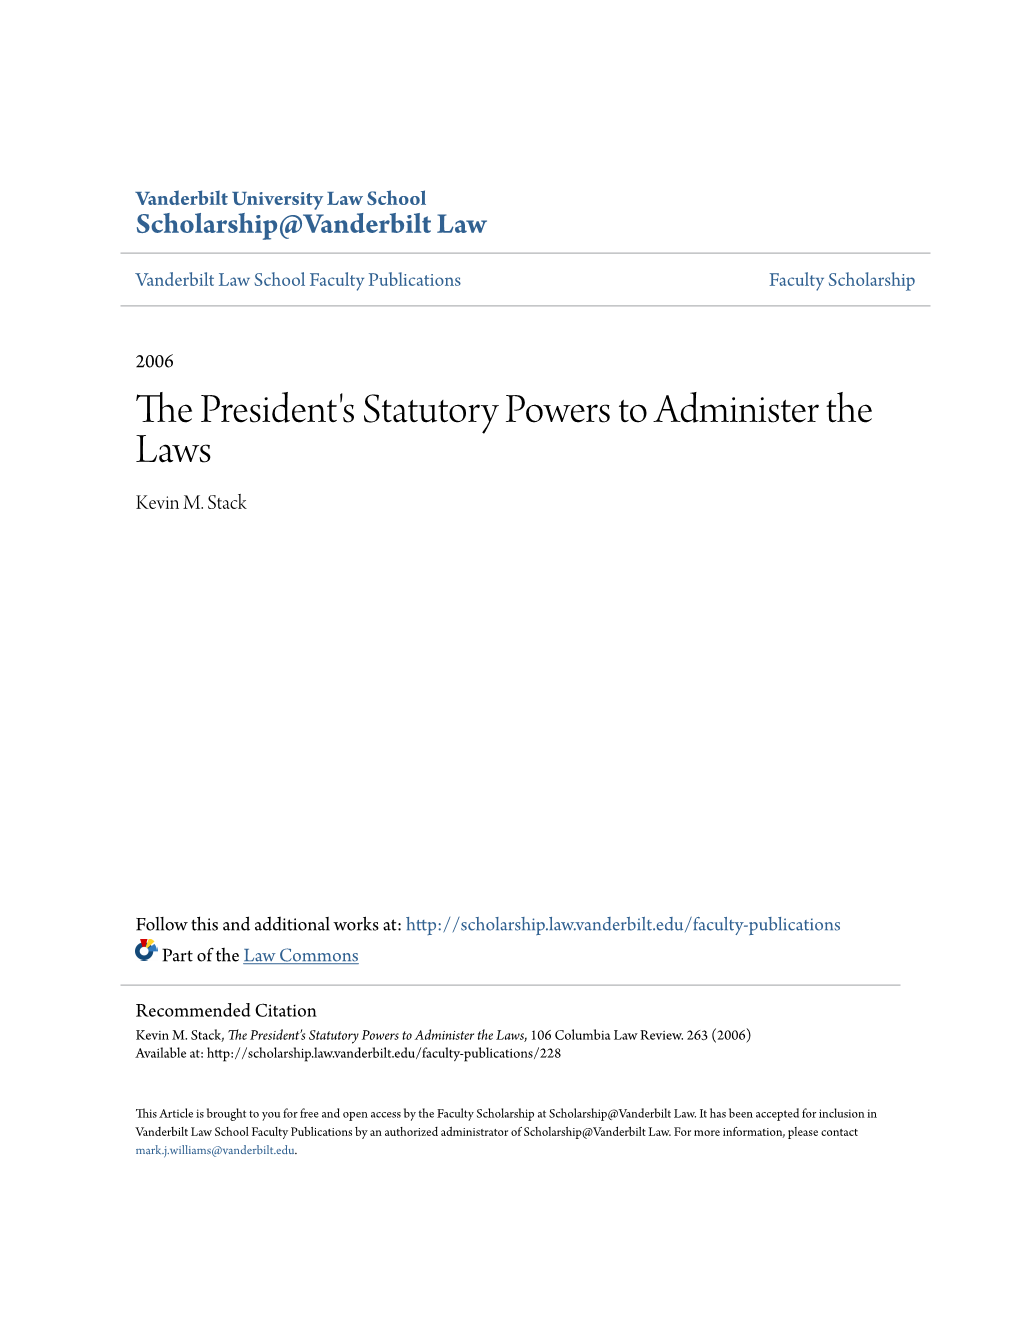 The President's Statutory Powers to Administer the Laws, 106 Columbia Law Review